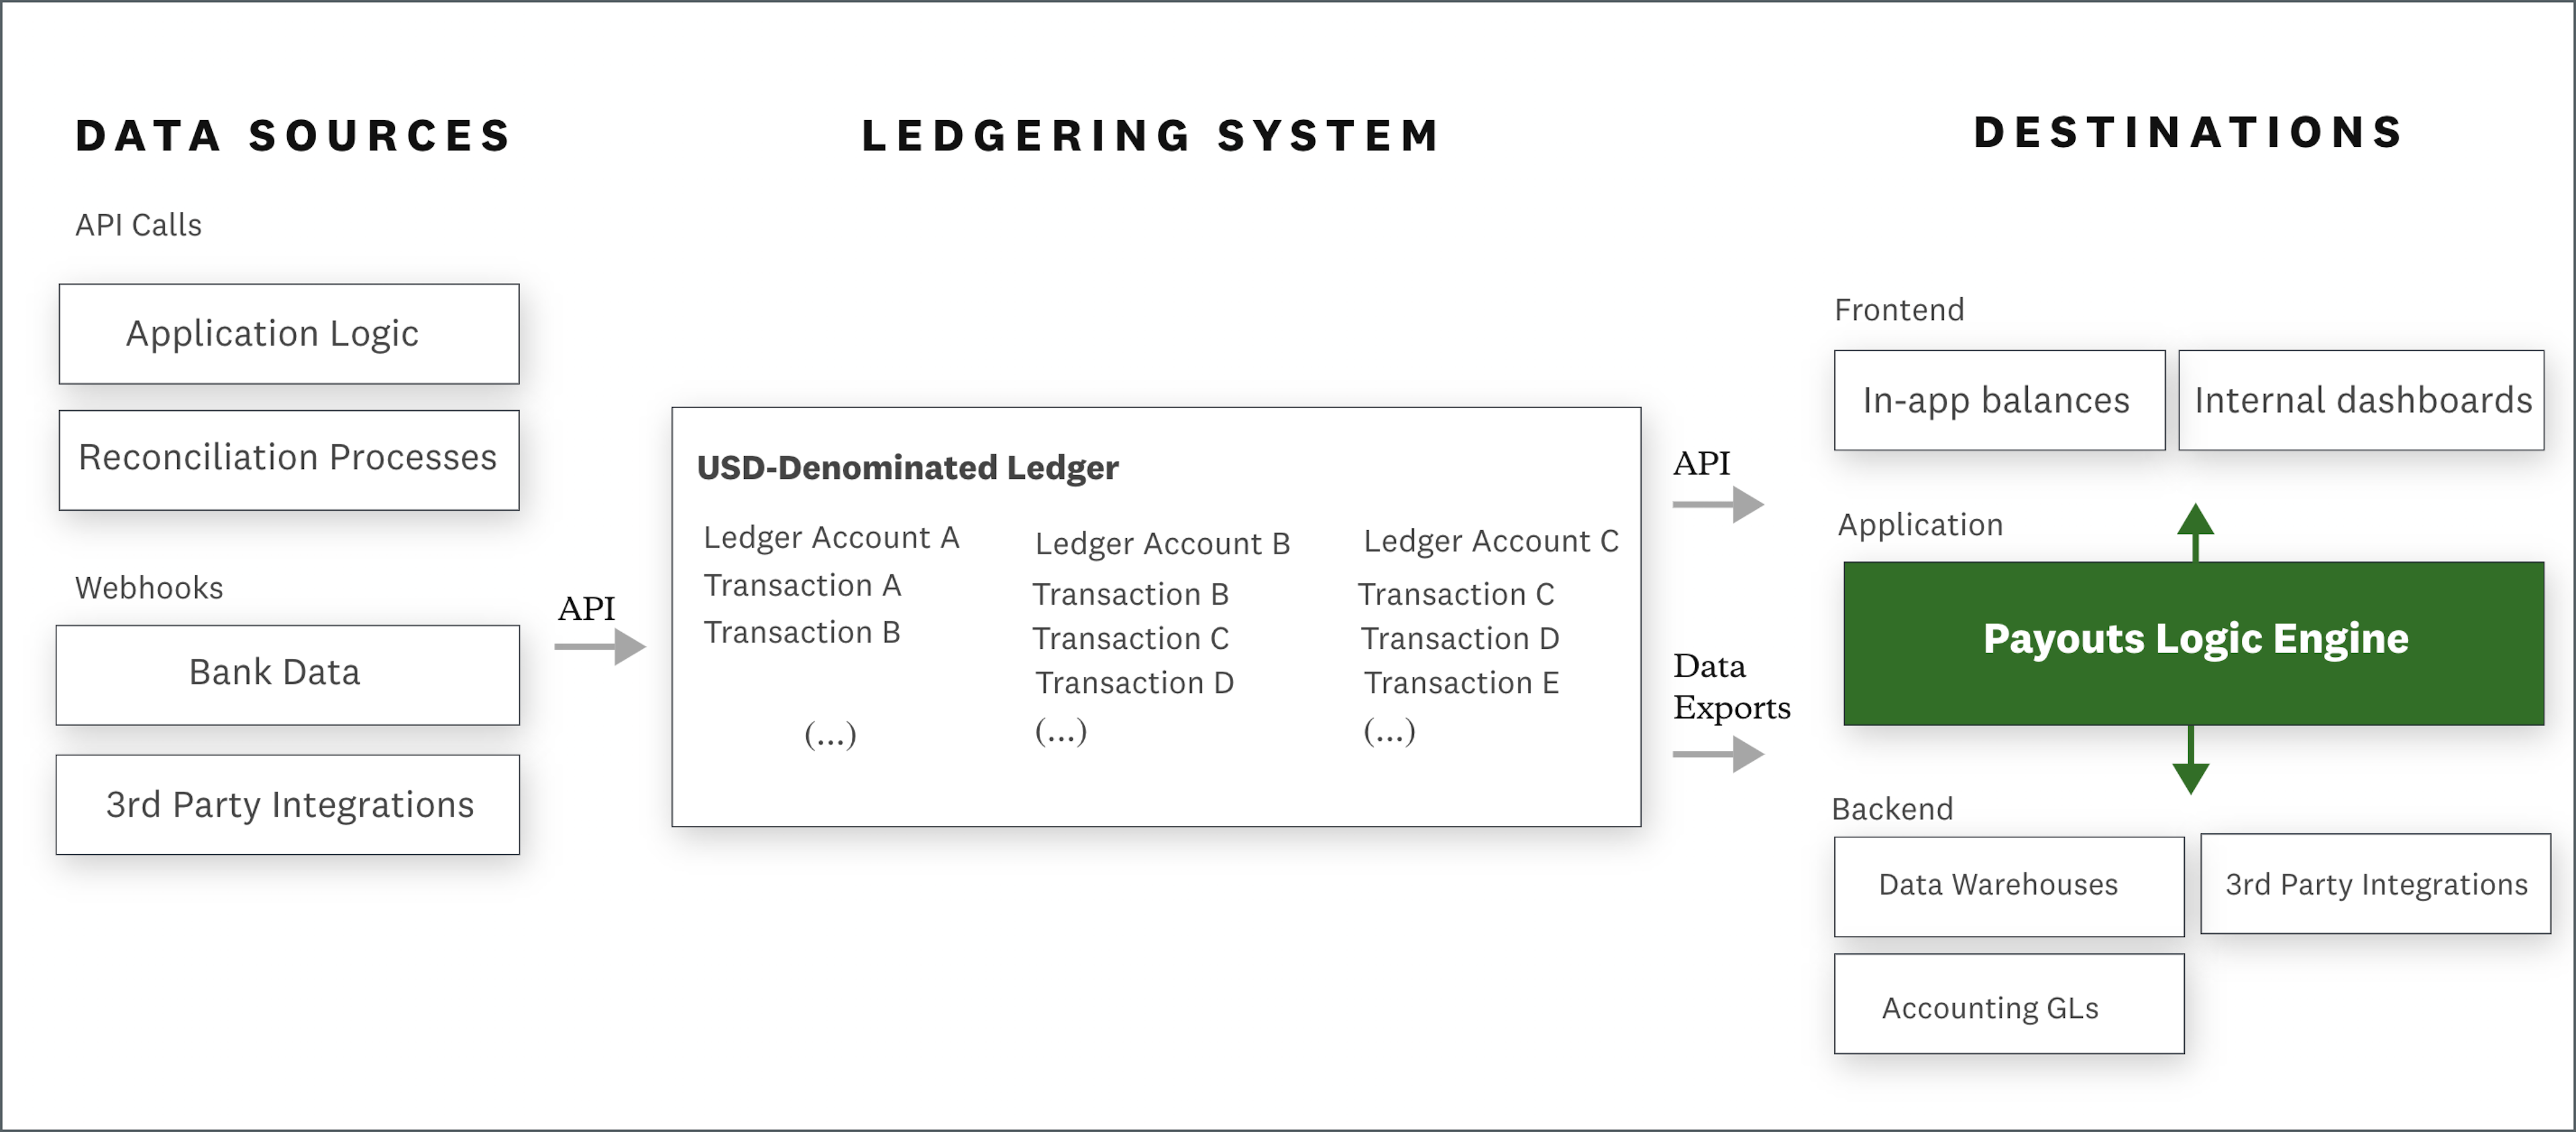 Schematic of a ledgering system focused on automatic payouts.